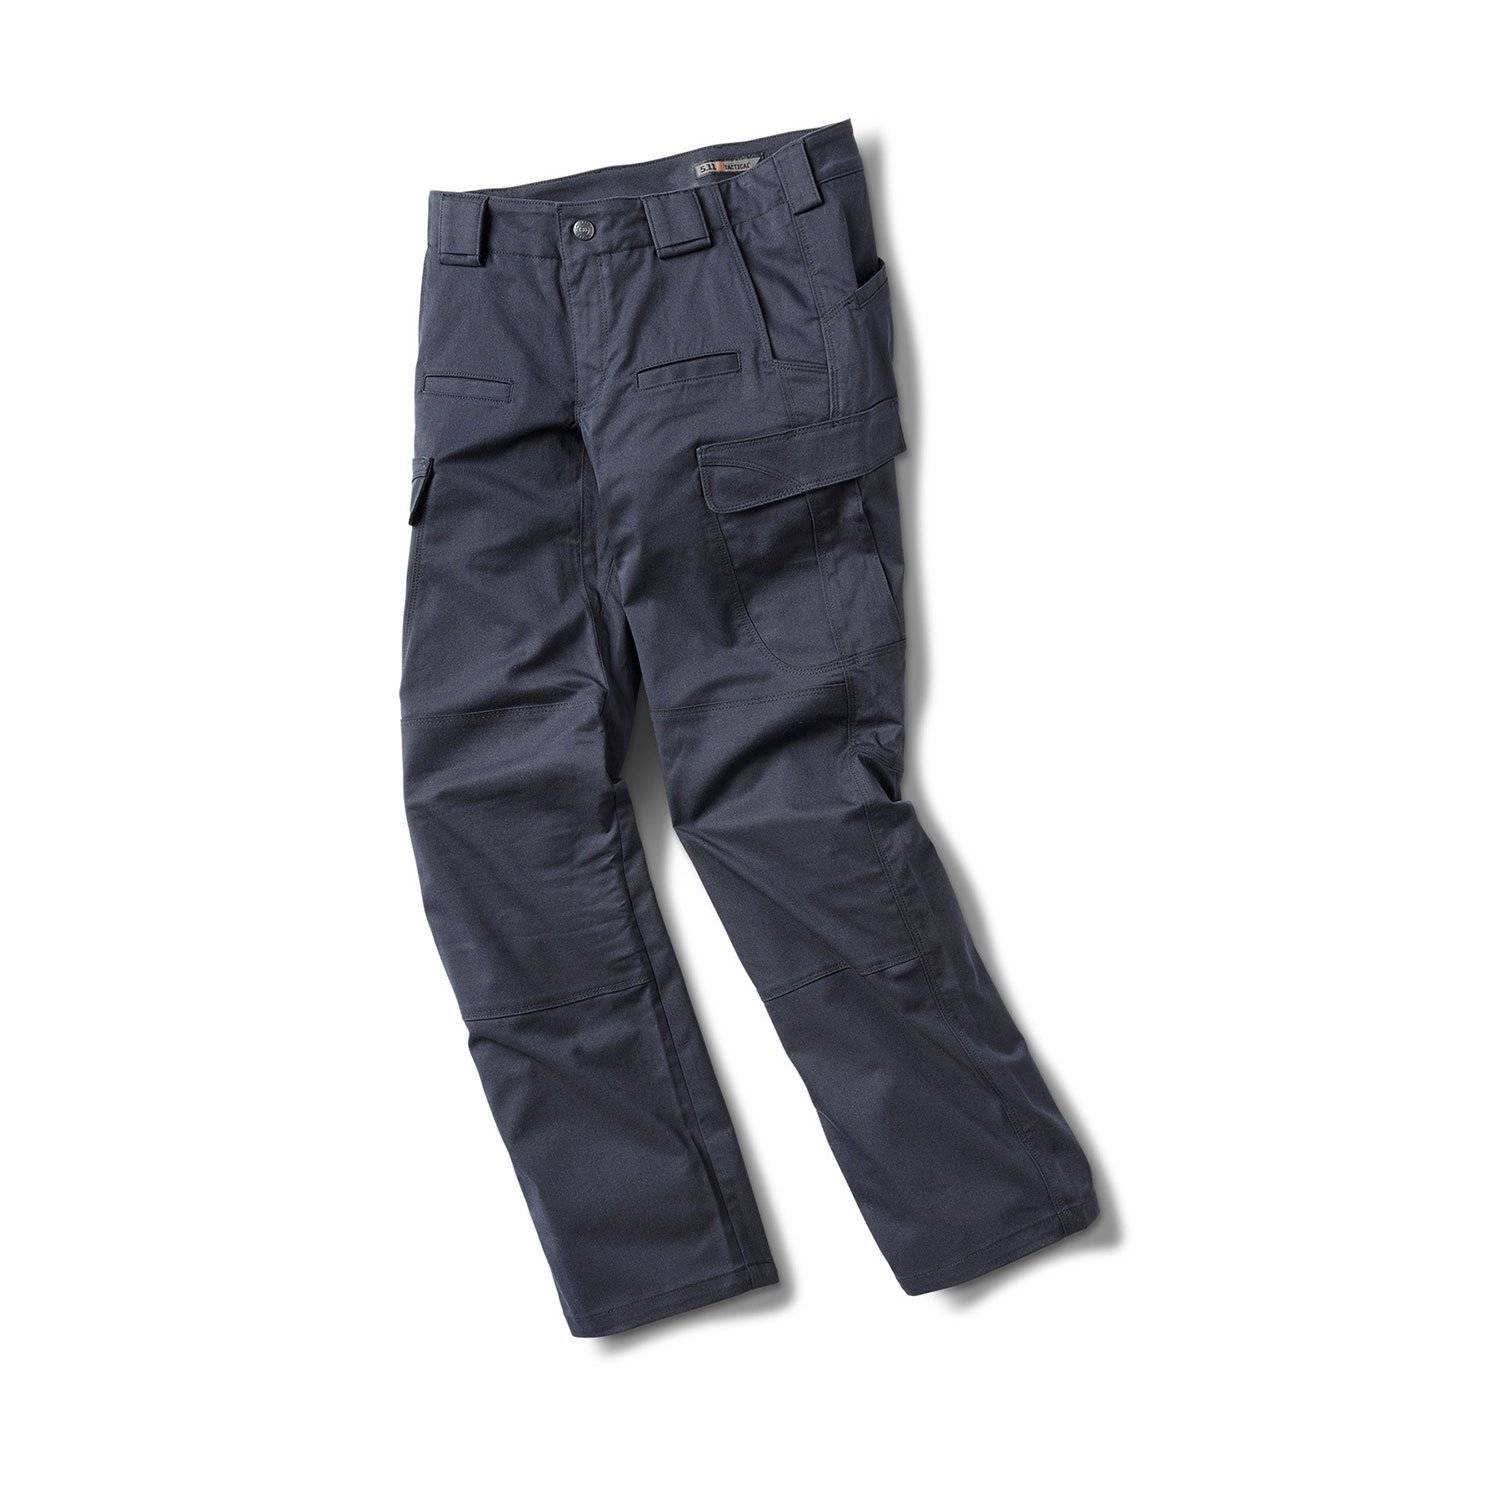 5.11 Tactical Womens NYPD Twill Stryke Pant